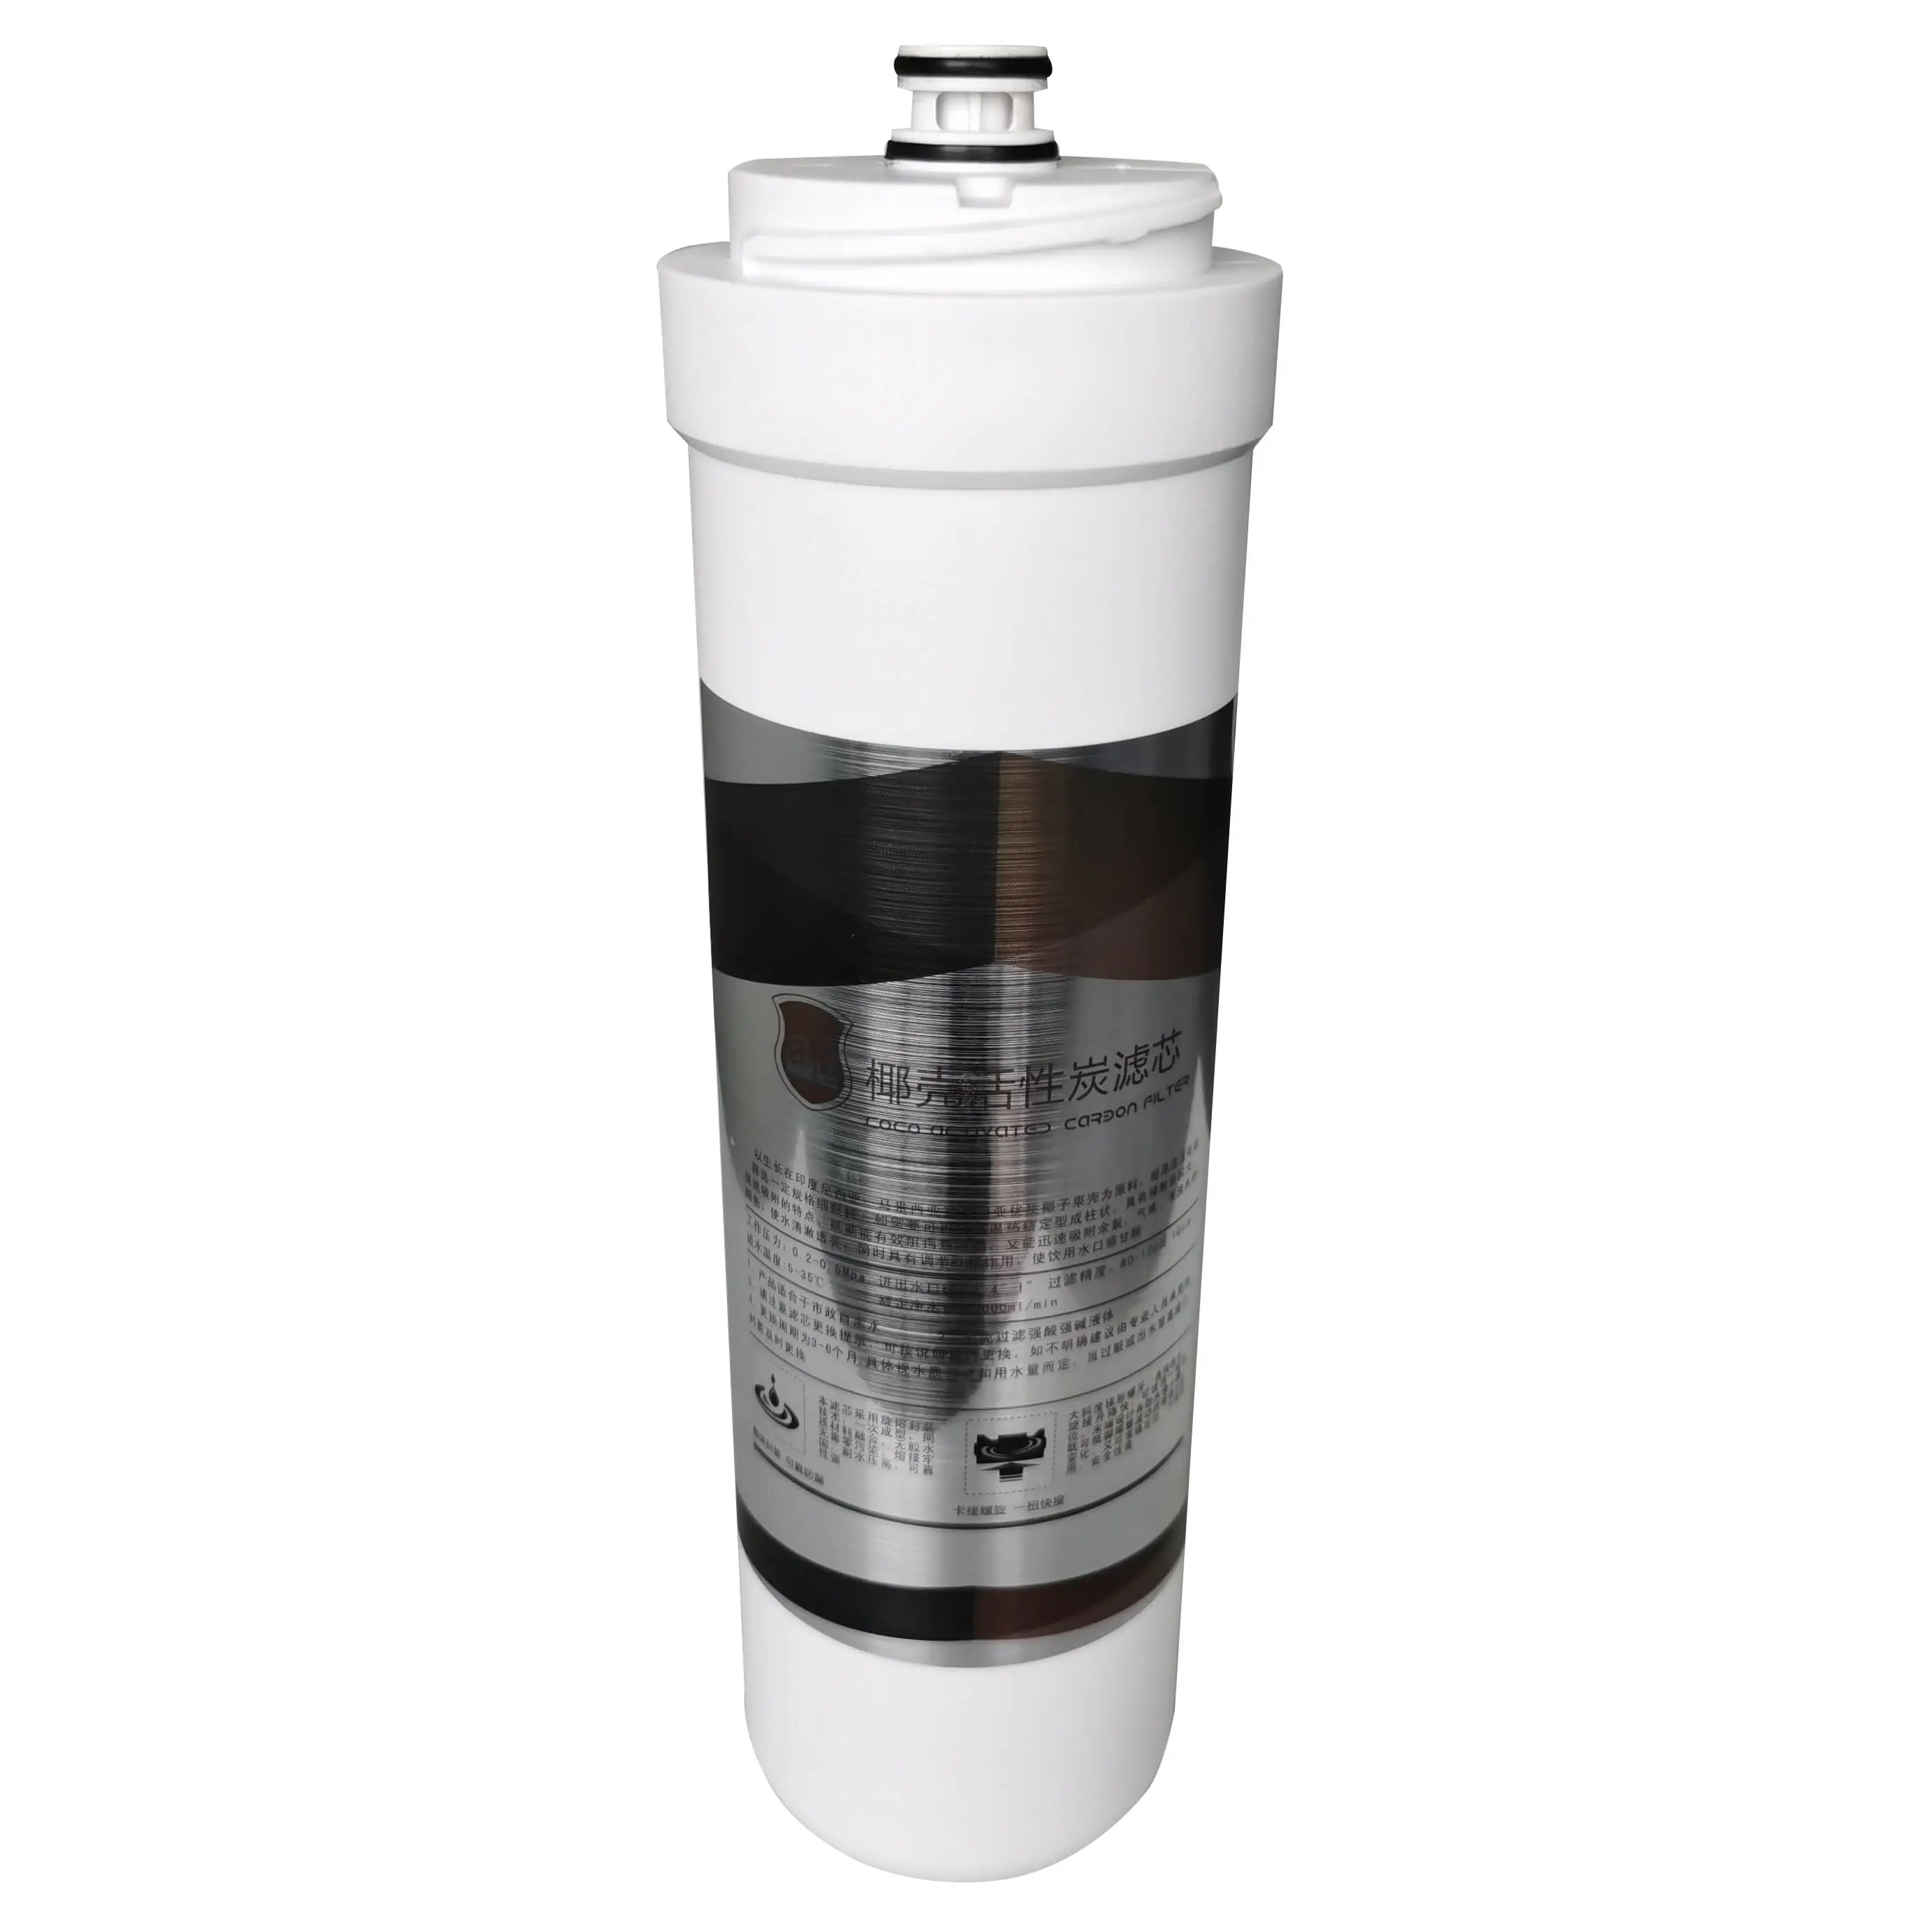 Carbon Water Filter Activated Carbon Filter Element For Water Filter